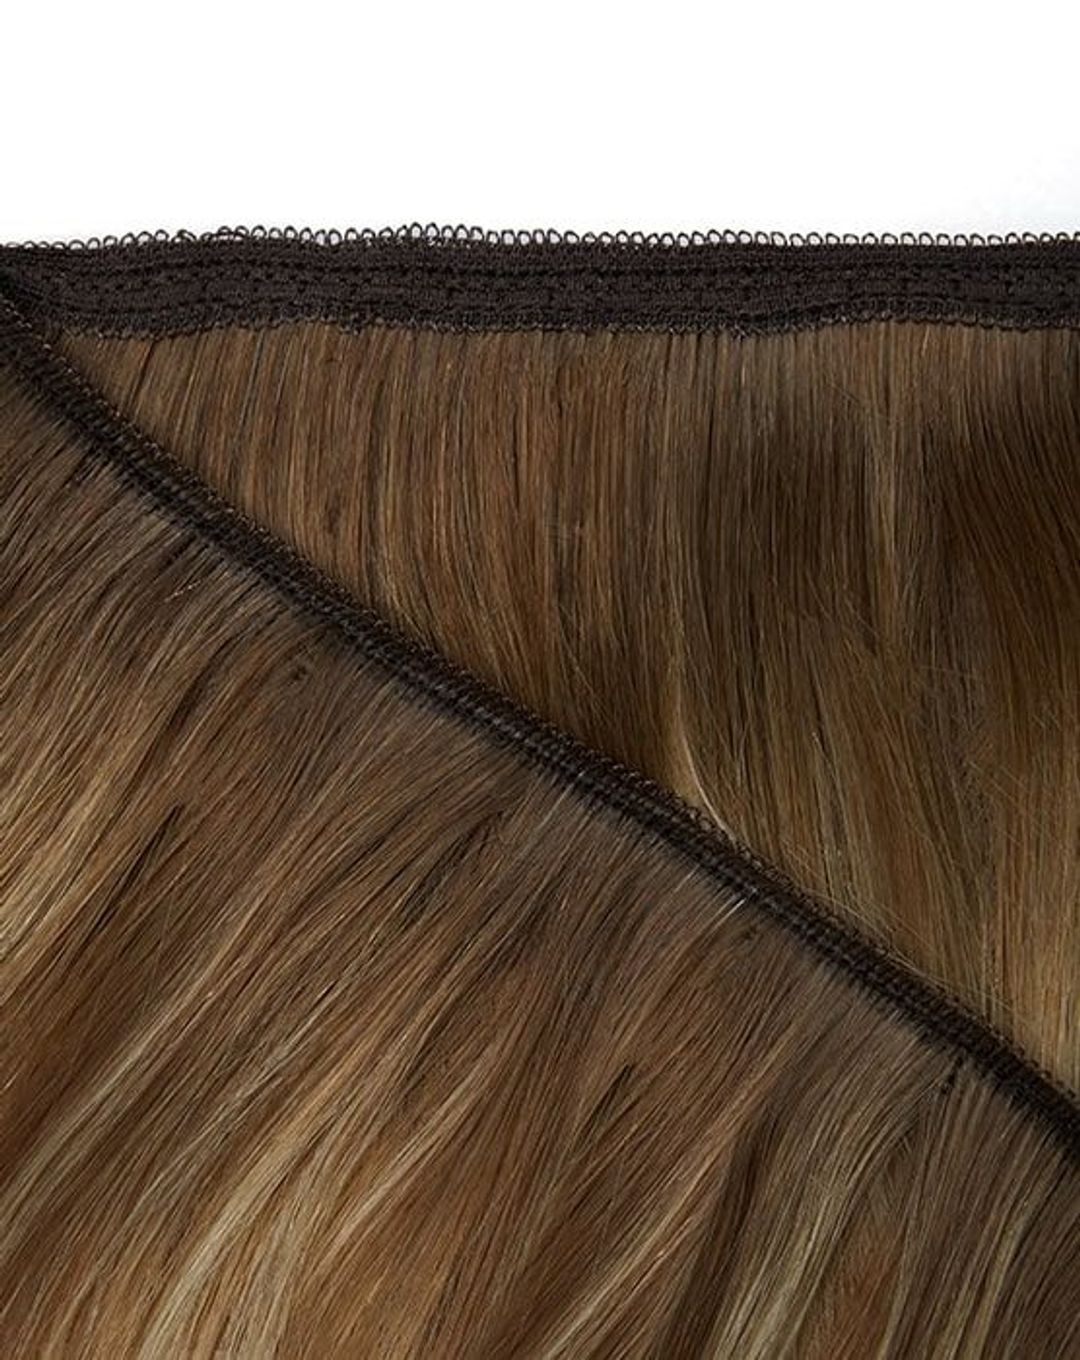 Beauty Works Gold Double Weft Extensions - Viking Blonde,18"